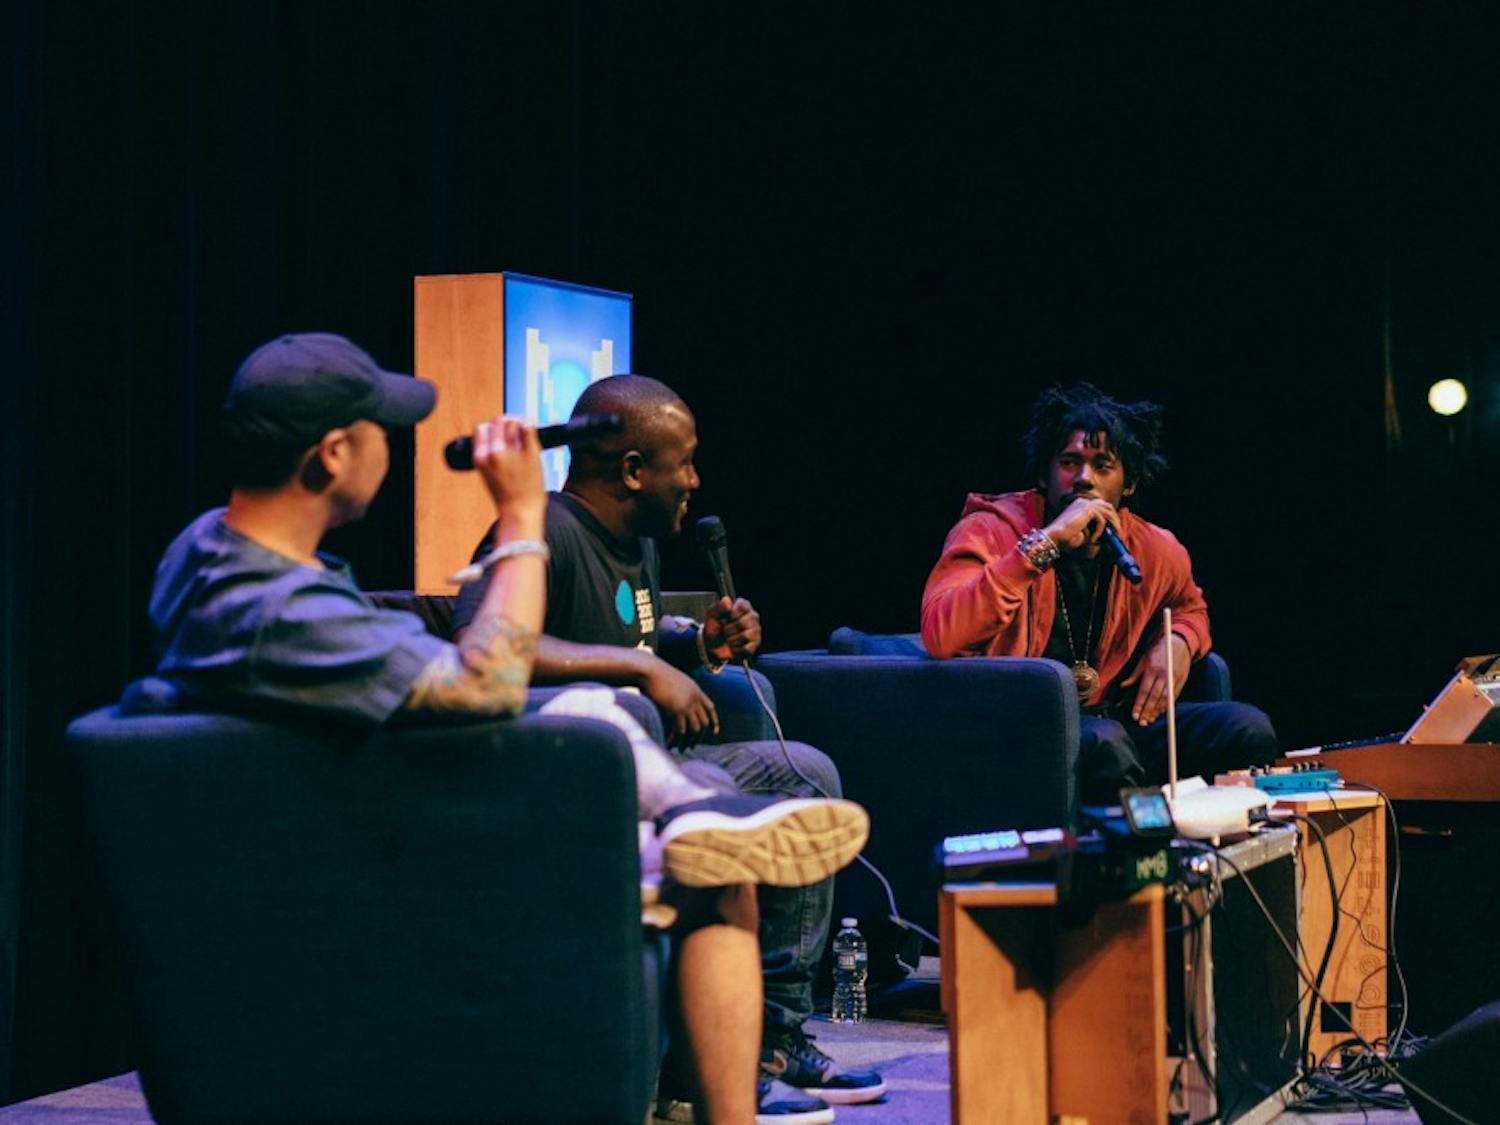 From left to right, DJ Tony Trimm, comedian Hannibal Buress and producer Flying Lotus talked music and creativity at the Carolina Theatre May 20.